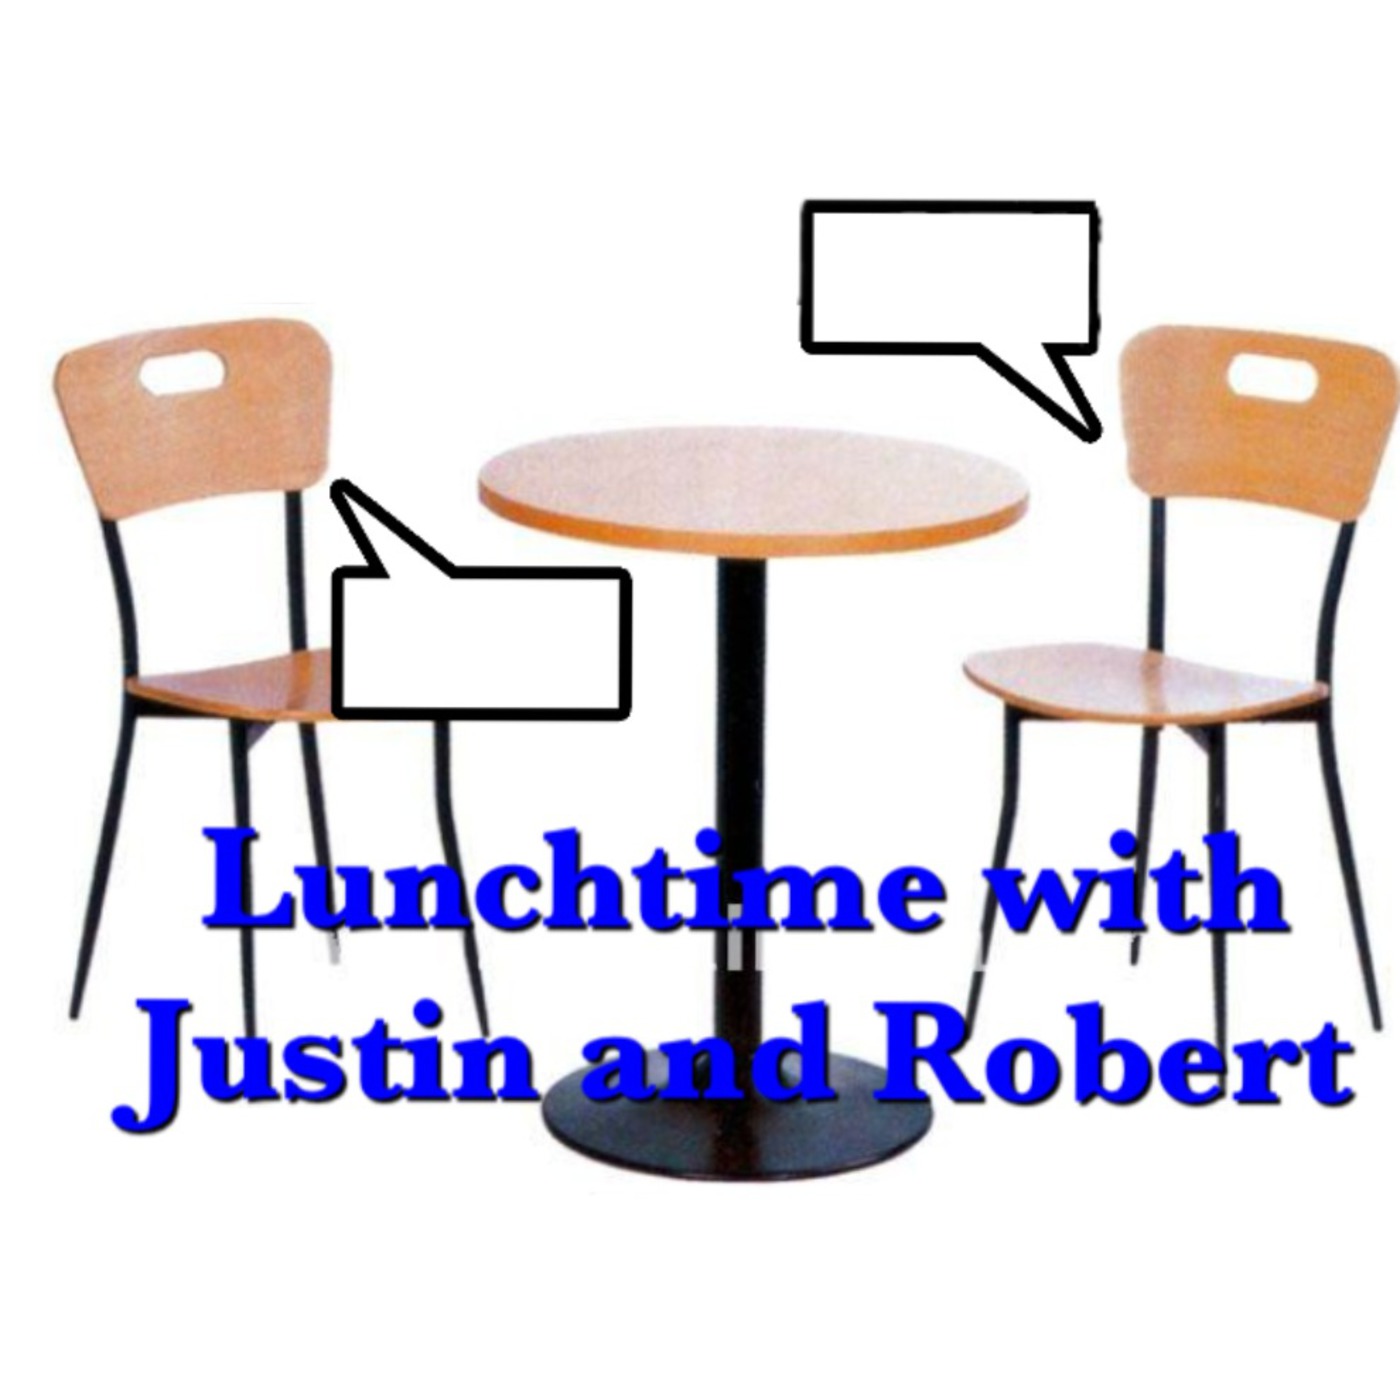 Lunchtime with Justin and Robert